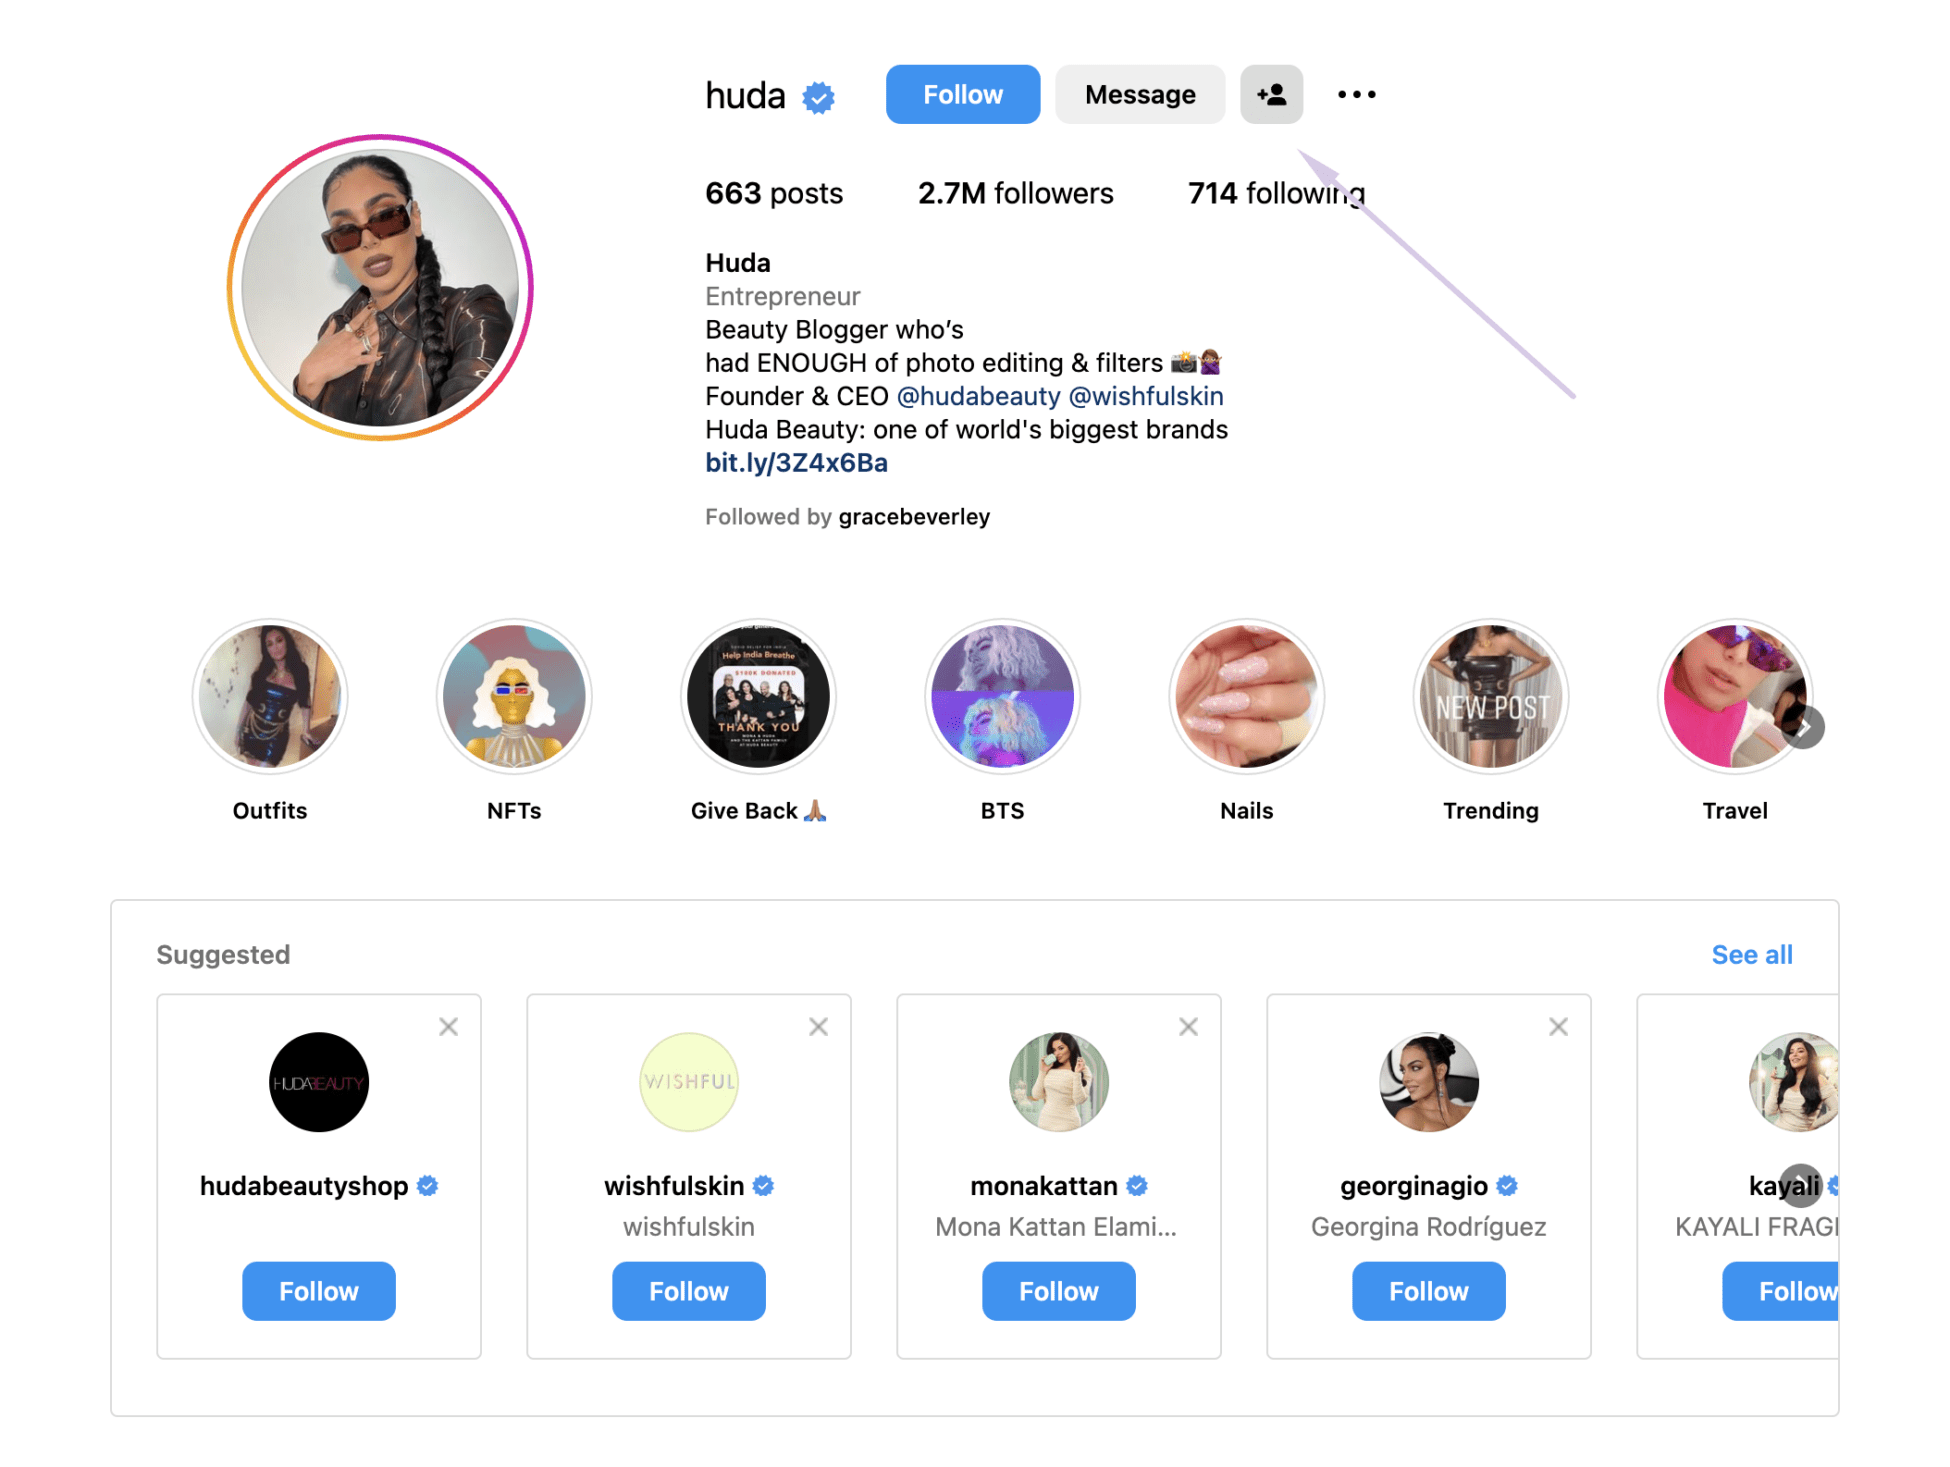 find beauty influencers – check similar influencers